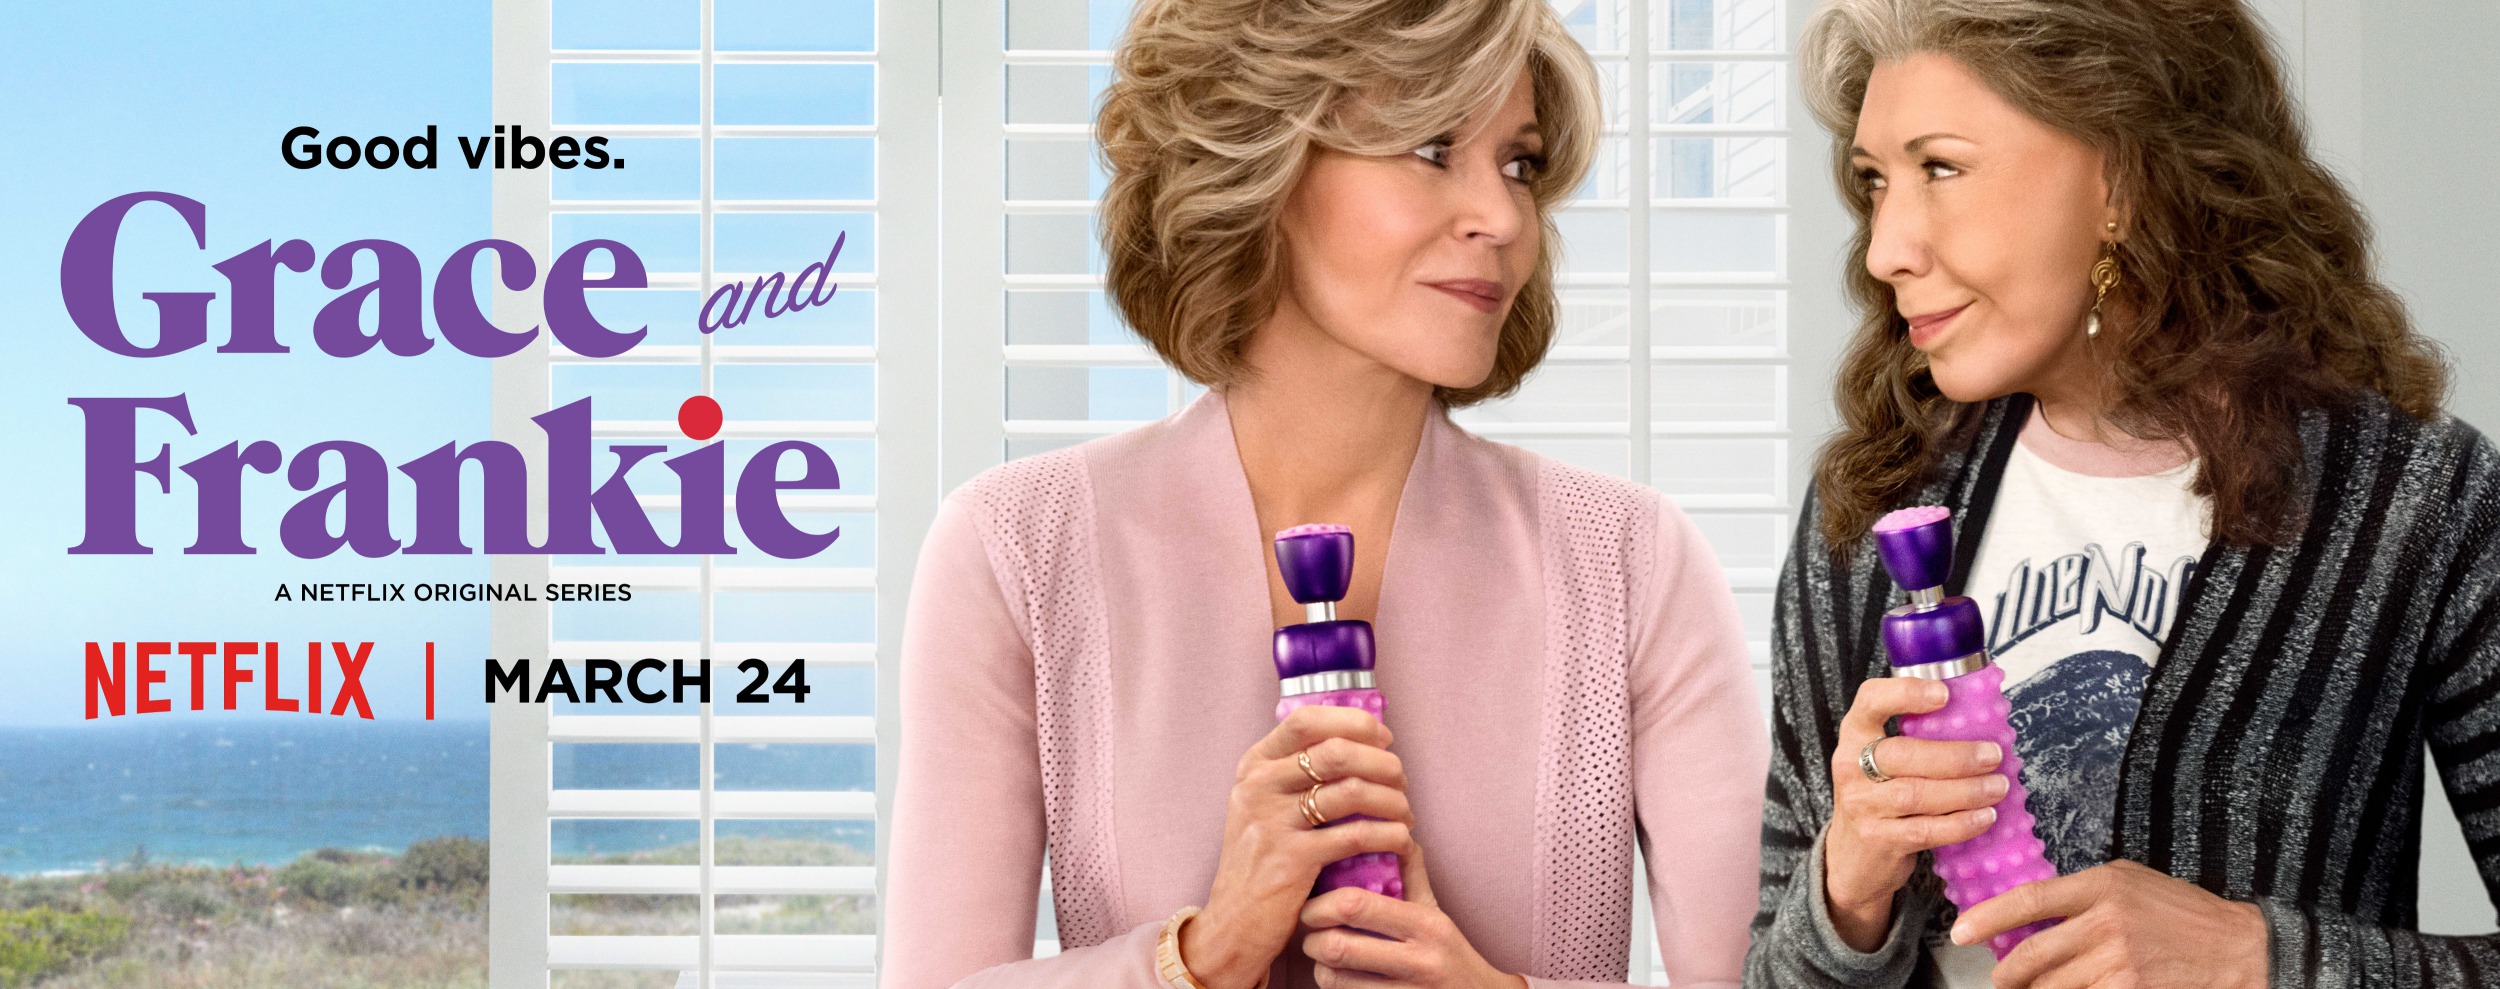 Mega Sized TV Poster Image for Grace and Frankie (#11 of 16)